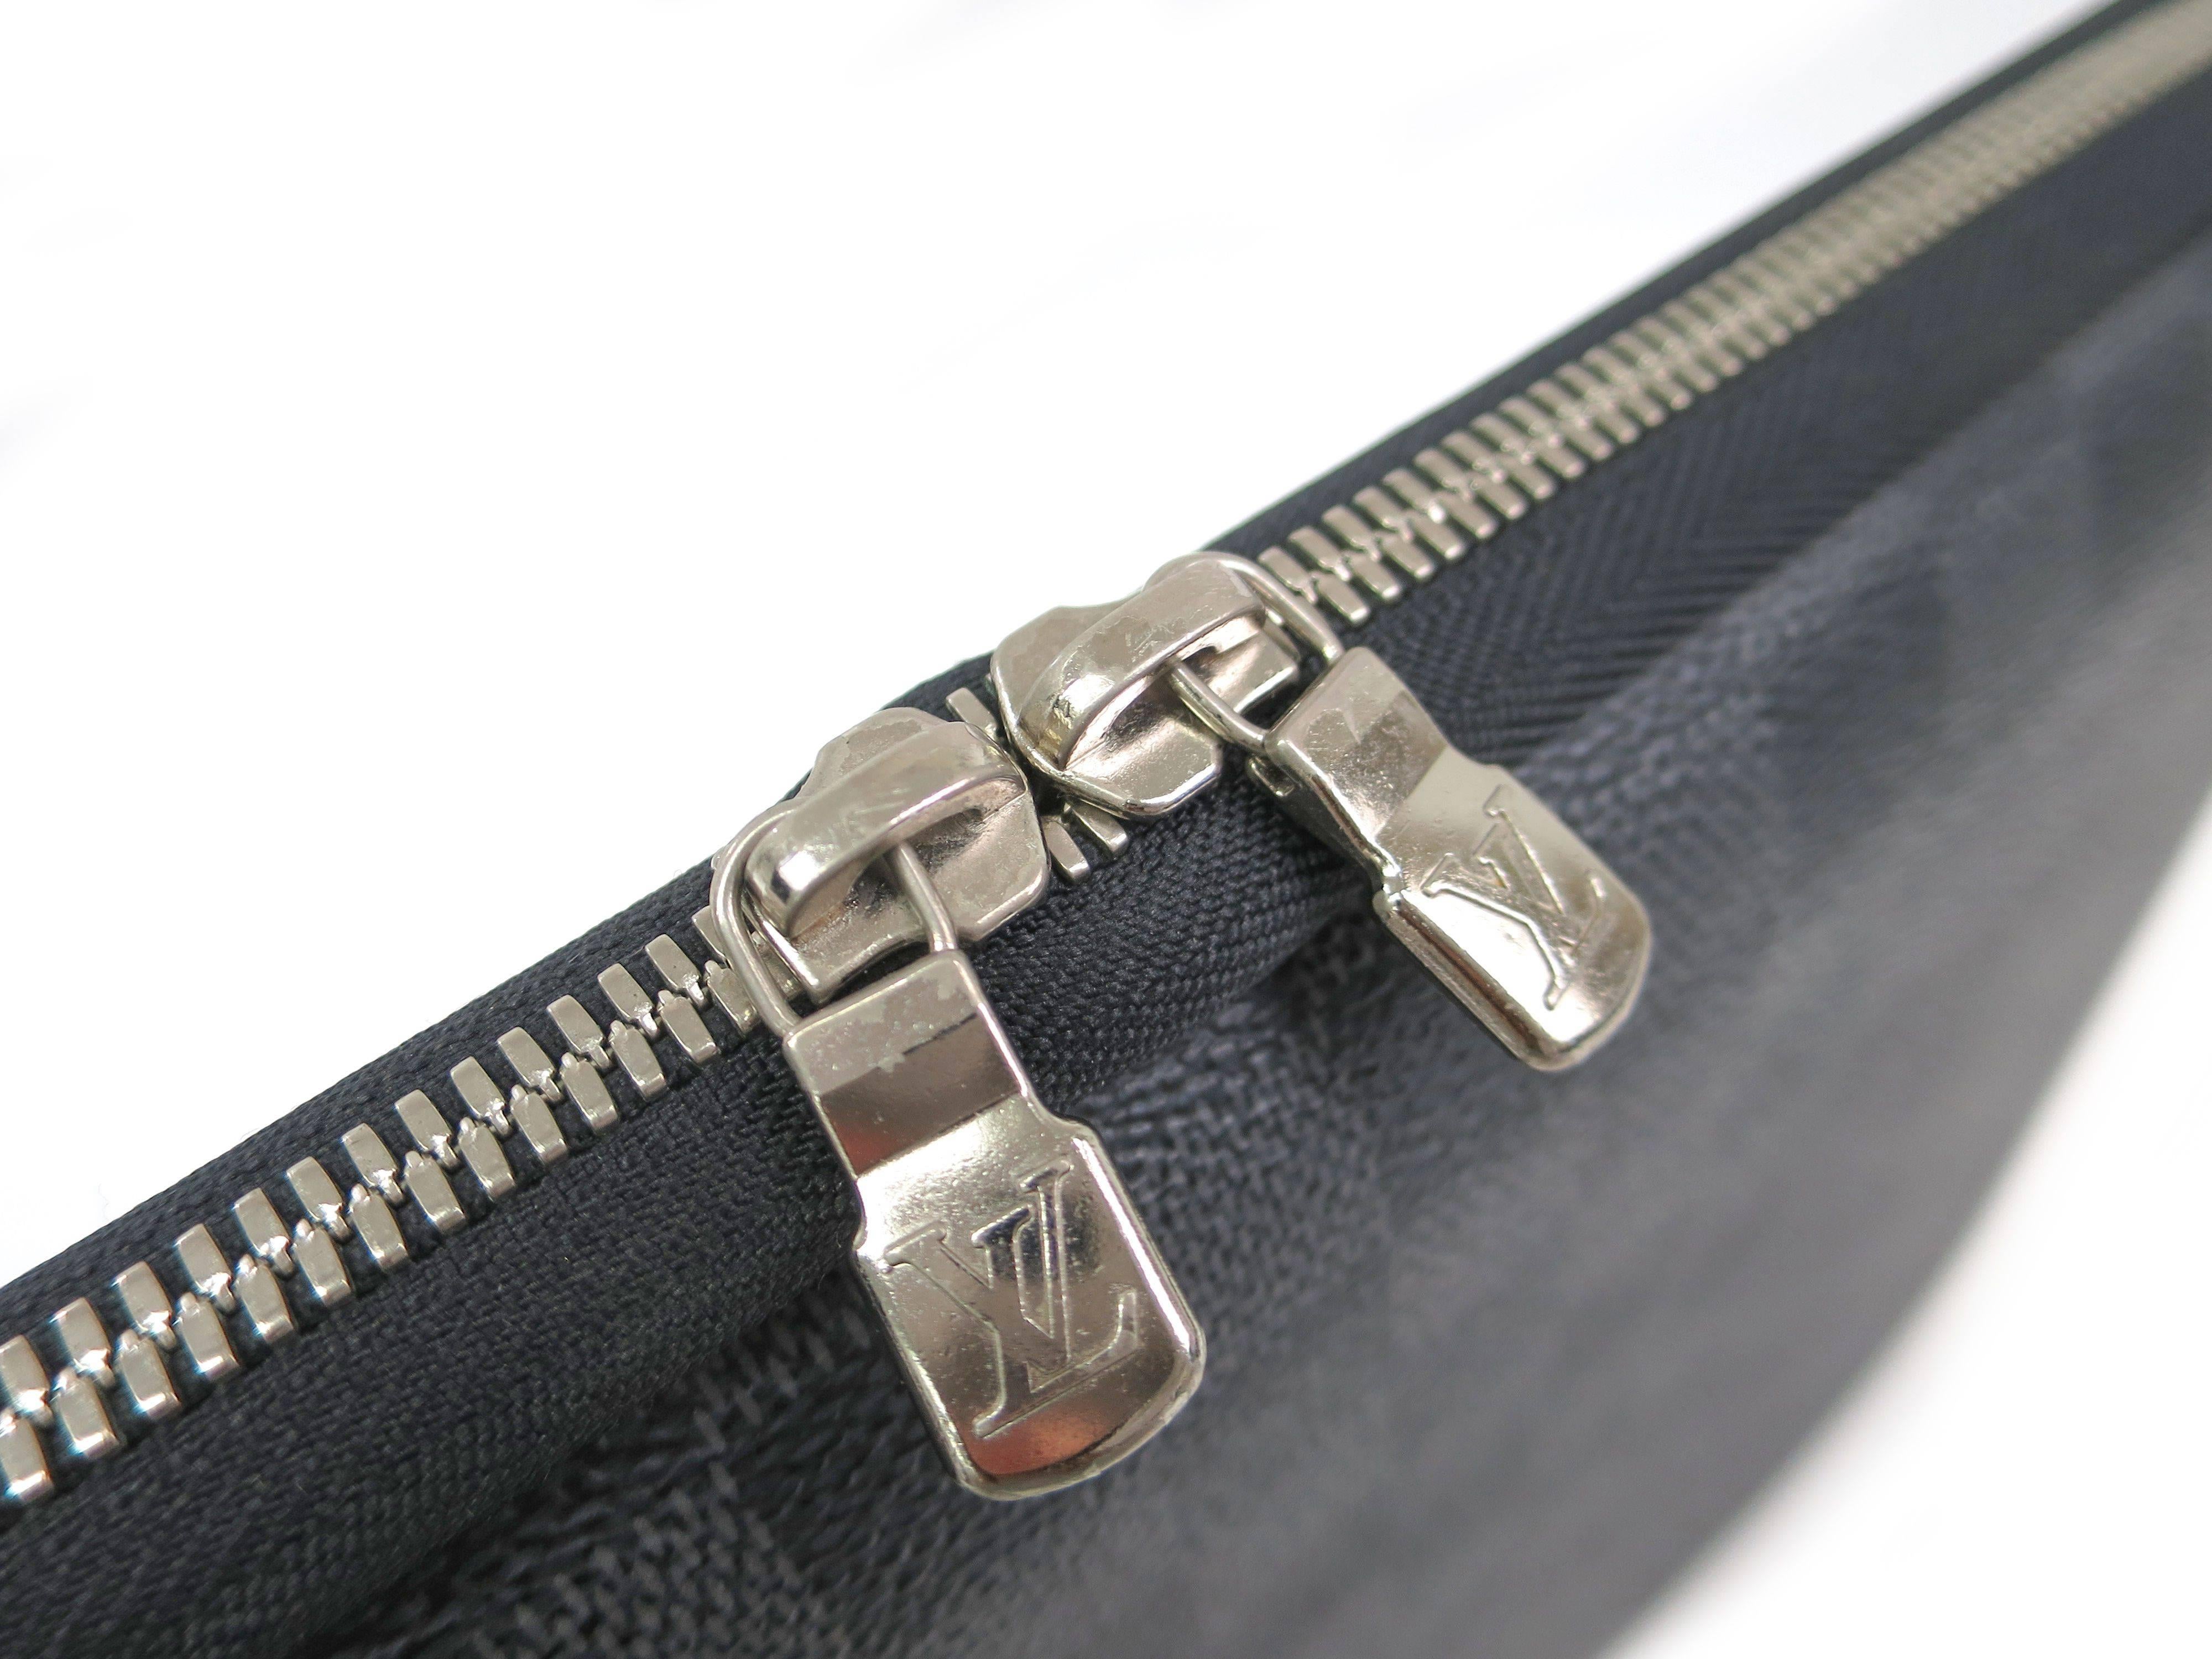 CURATOR'S NOTES

Louis Vuitton Monogram Canvas Tech Laptop Men's Carryall Travel Bag Case  

Coated canvas
Suede lining
Silver tone hardware
Zipper closure
Made in France
Date code  VI3059
Measures 13.8" W x 10.2" H x 2" D 

Shop